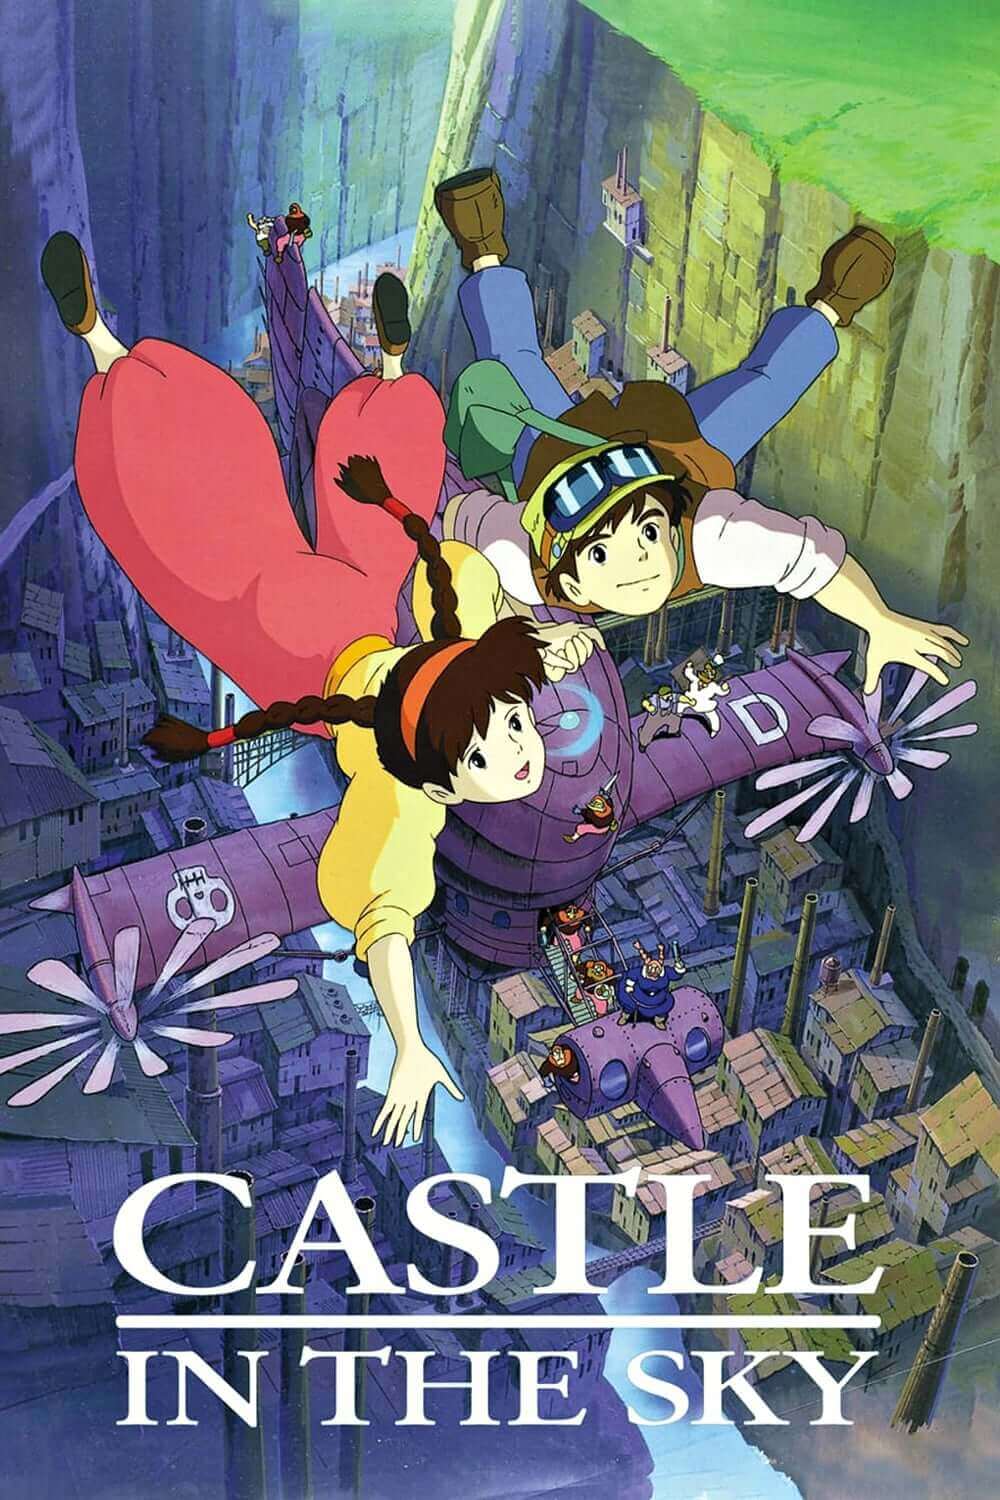 Watch Castle in the Sky today, it's one of the best Studio Ghibli movies on Netflix and best G-rated movies. Recommended for 8+ year olds.